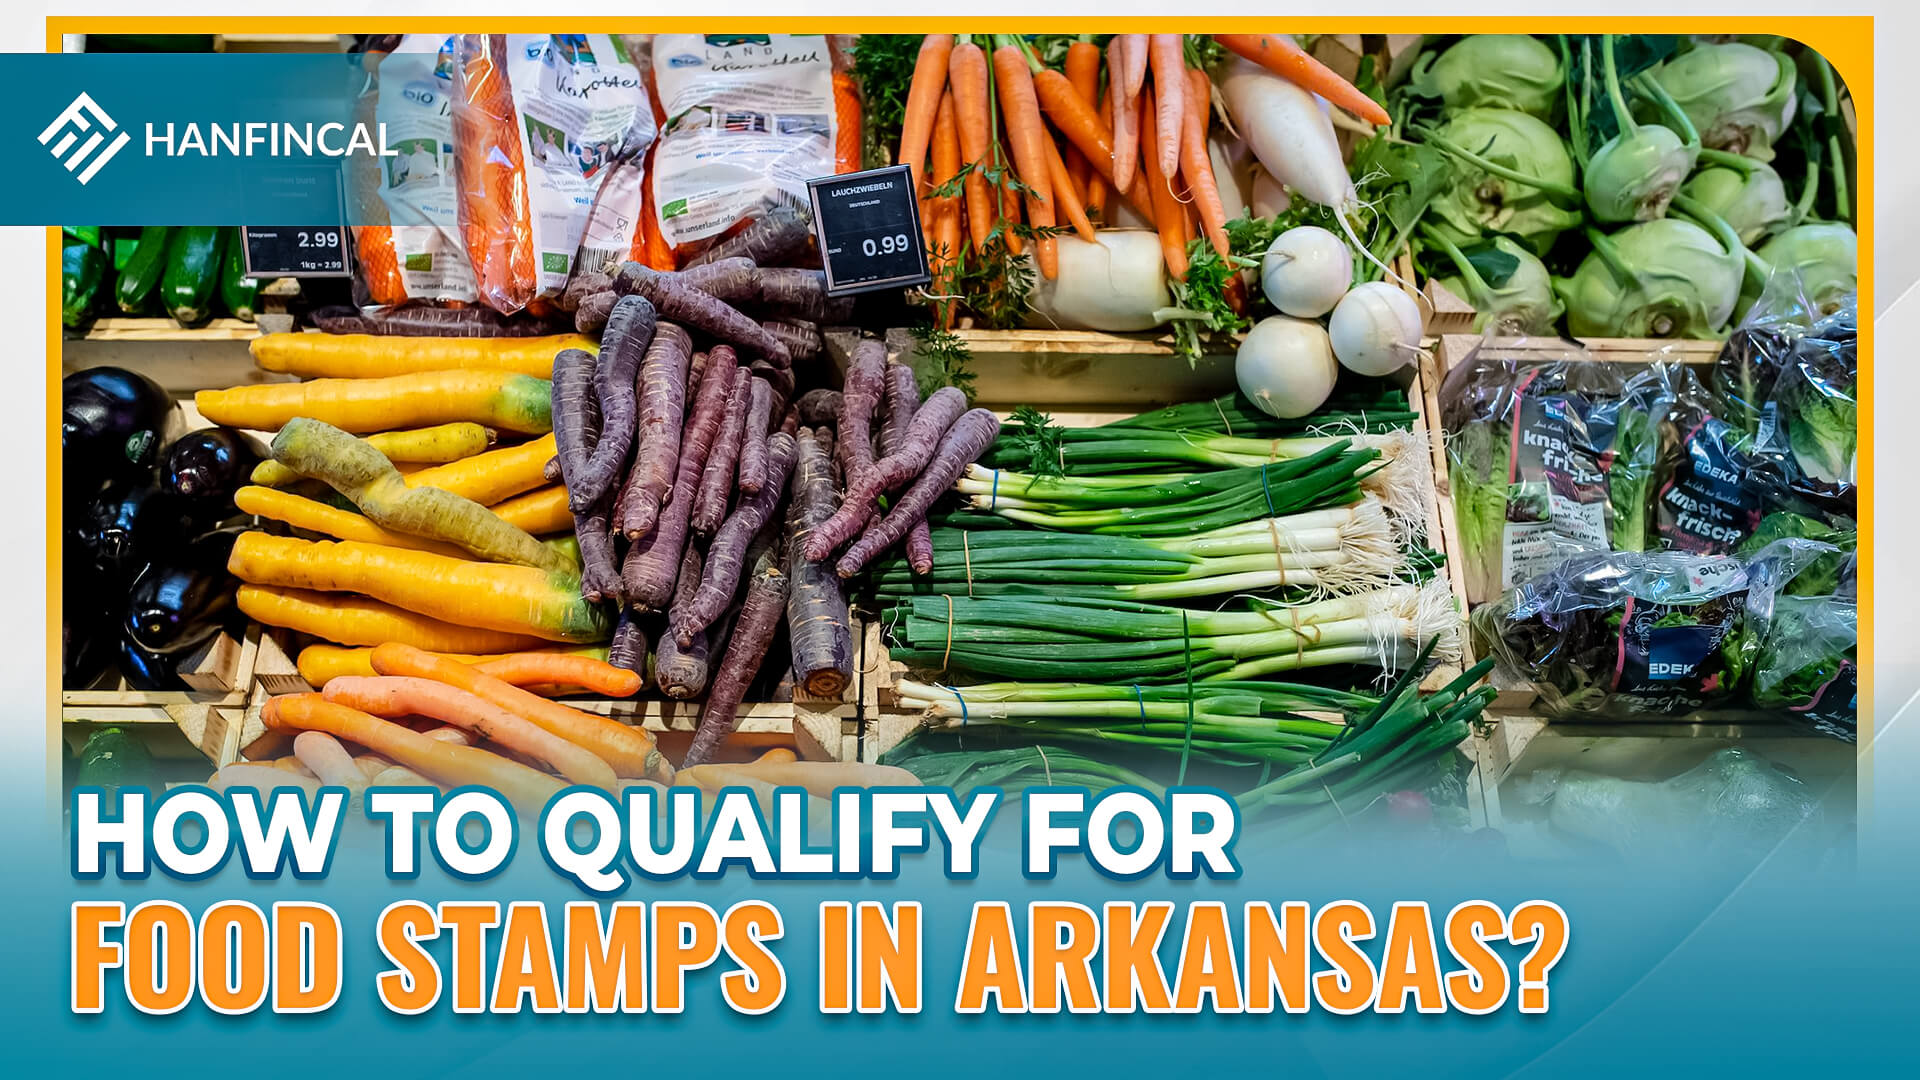 How Do You Qualify For Food Stamps In Arkansas?